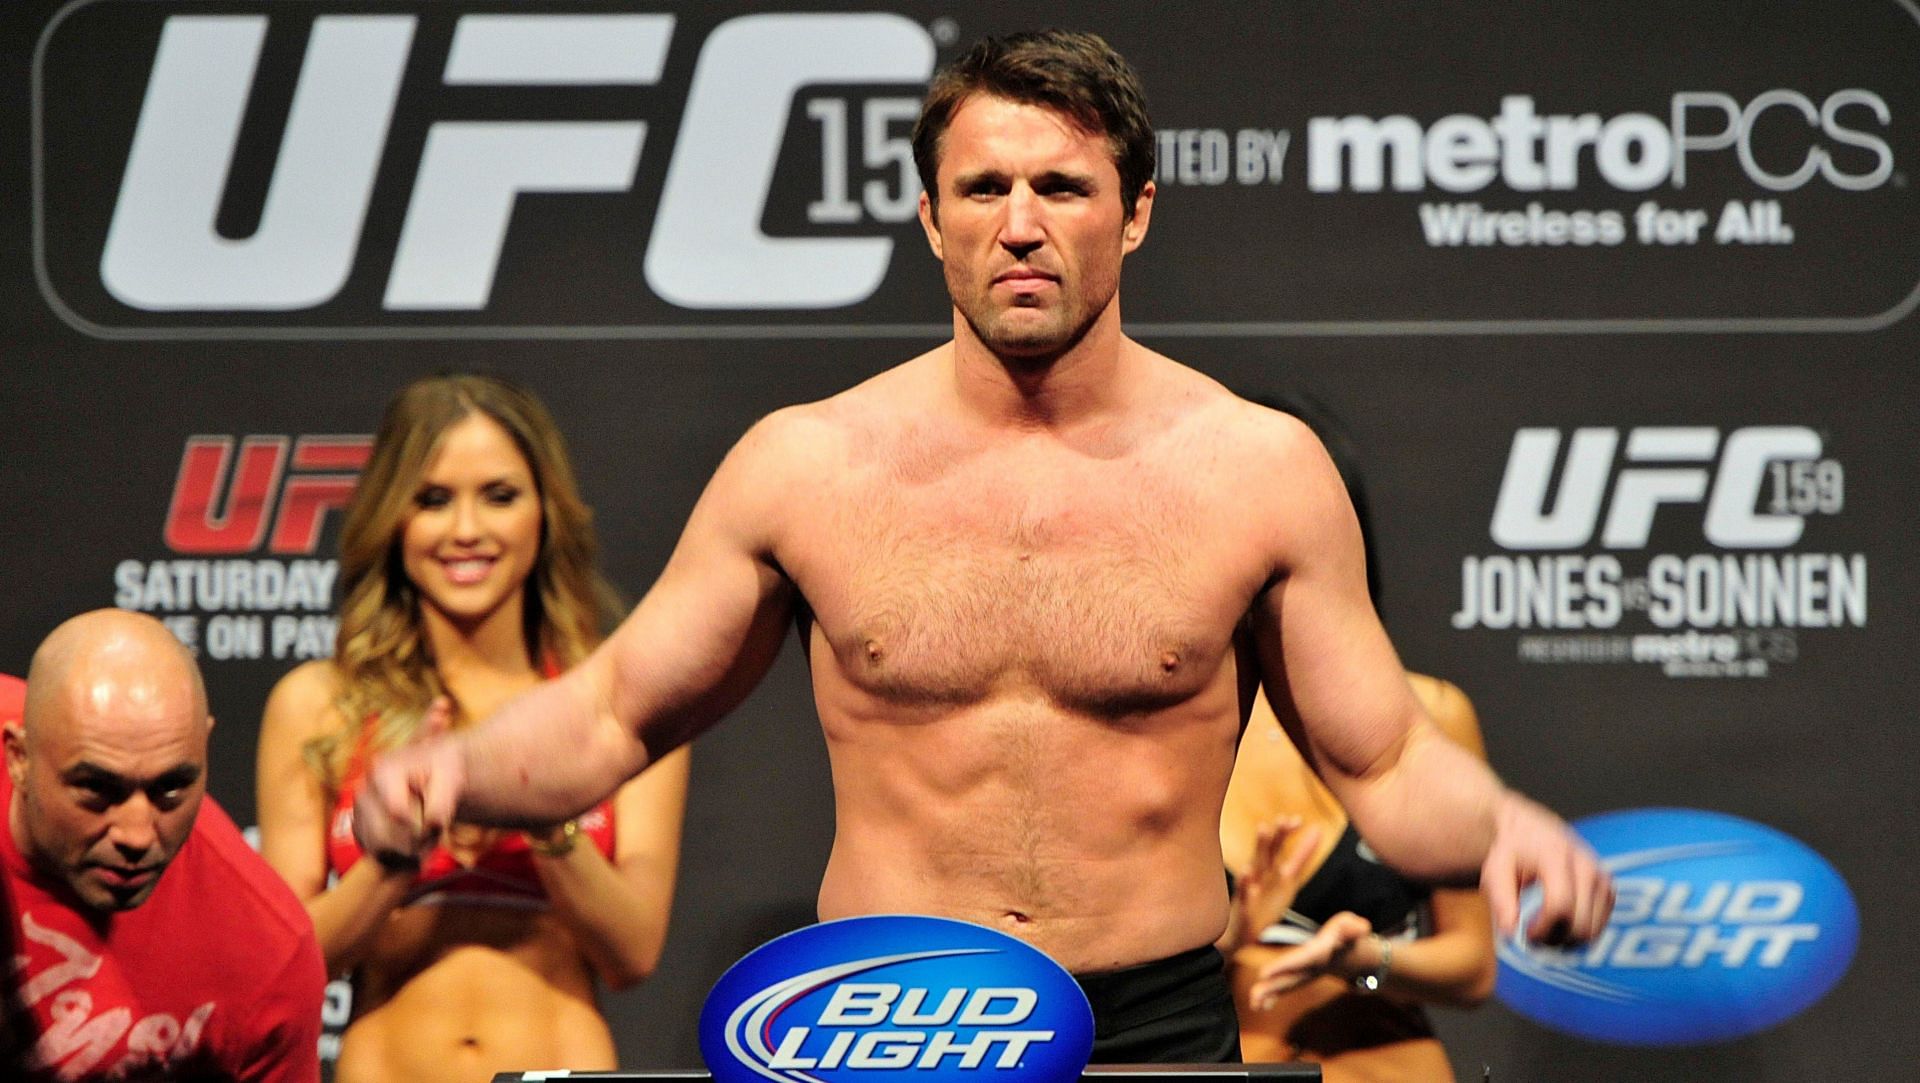 Chael Sonnen talked his way to a level of stardom that his fighting skills never could&#039;ve gotten him